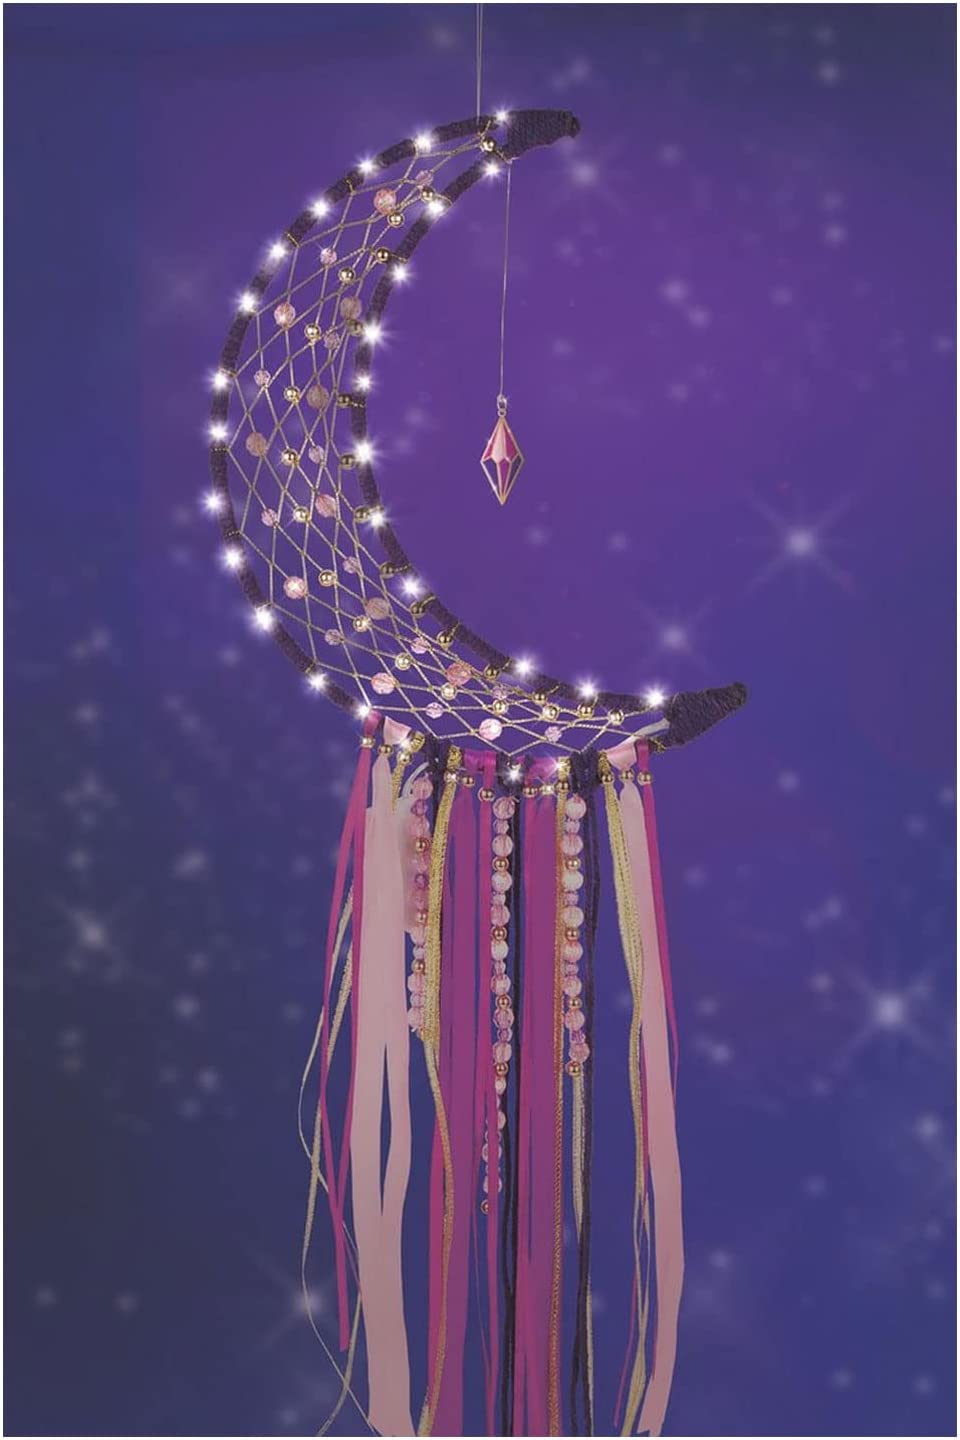 Make It Real Skylight Moon Dream Catcher with Fairy Lights